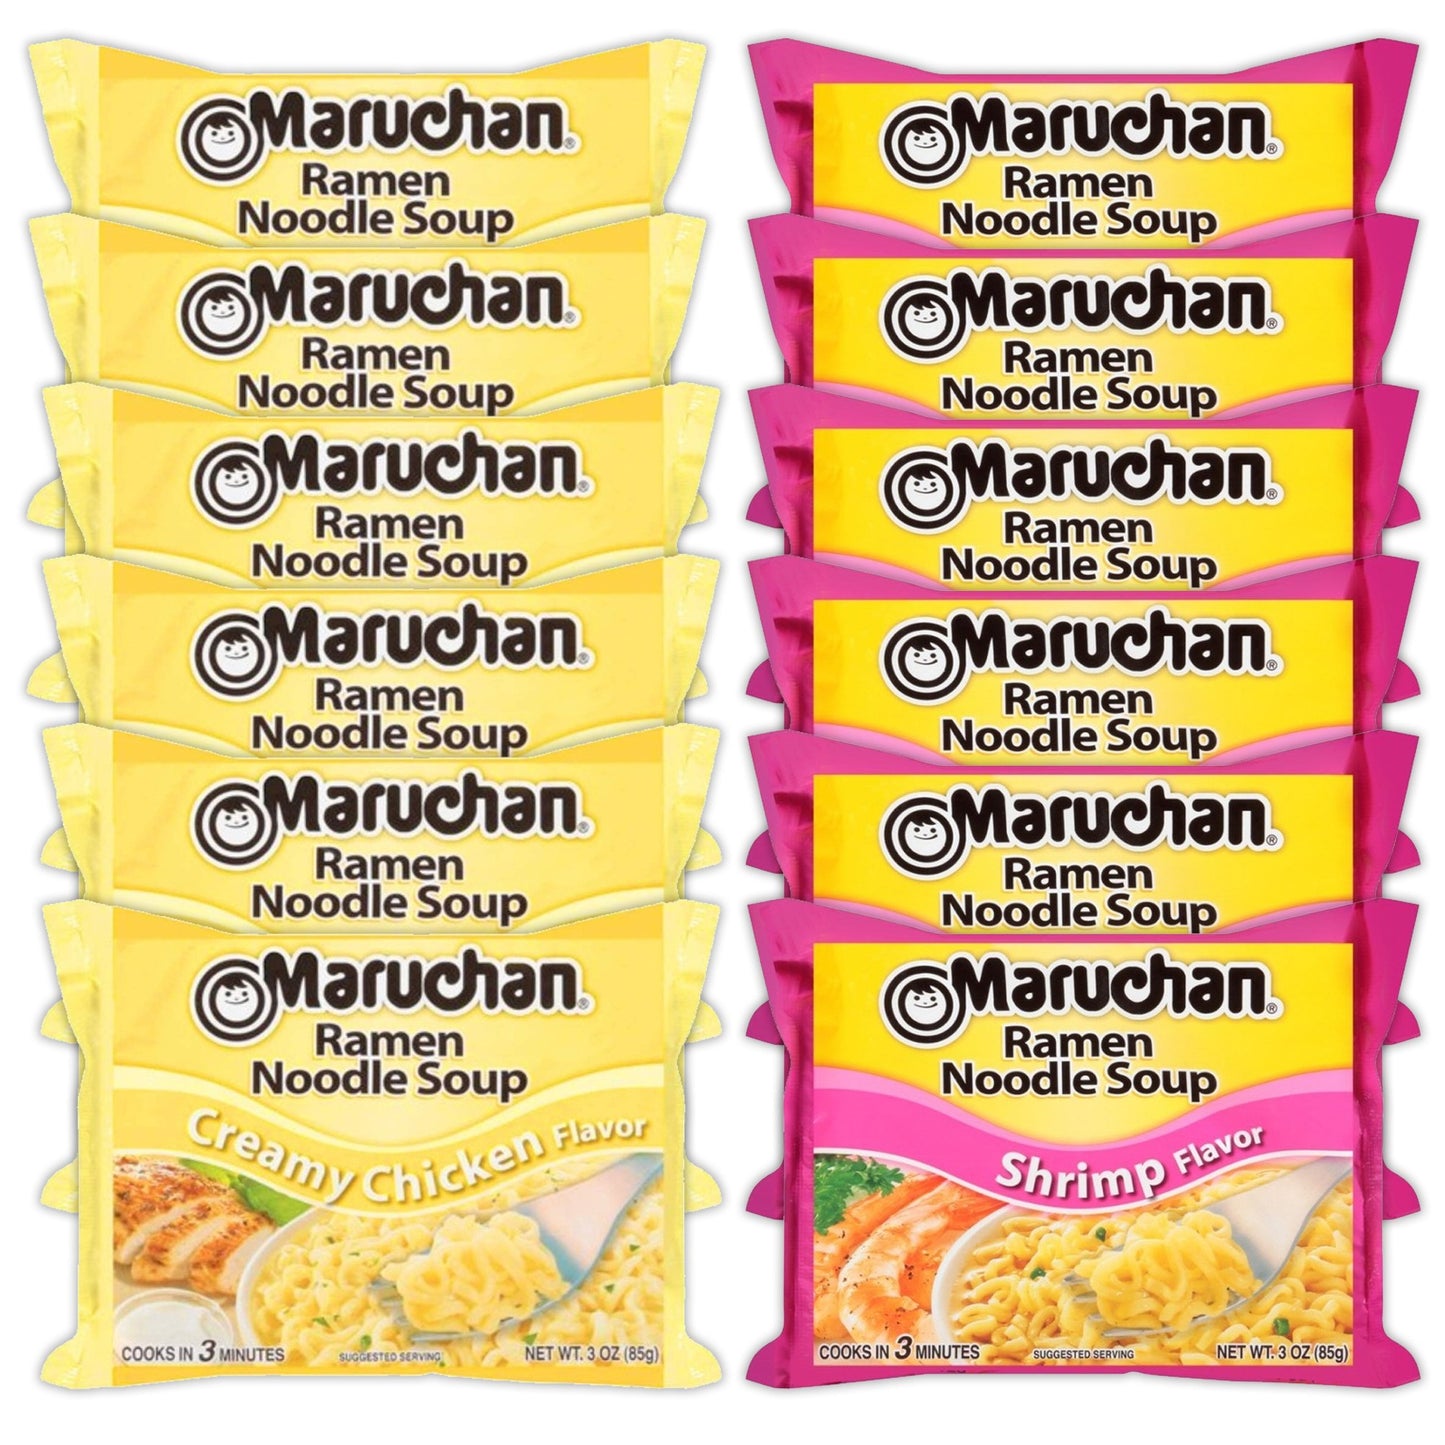 Maruchan Ramen Instant Noodle Soup Variety, 2 Flavors - 6 Packs Creamy Chicken & 6 Packs Shrimp , 3 Ounce Single Servings Lunch / Dinner Variety